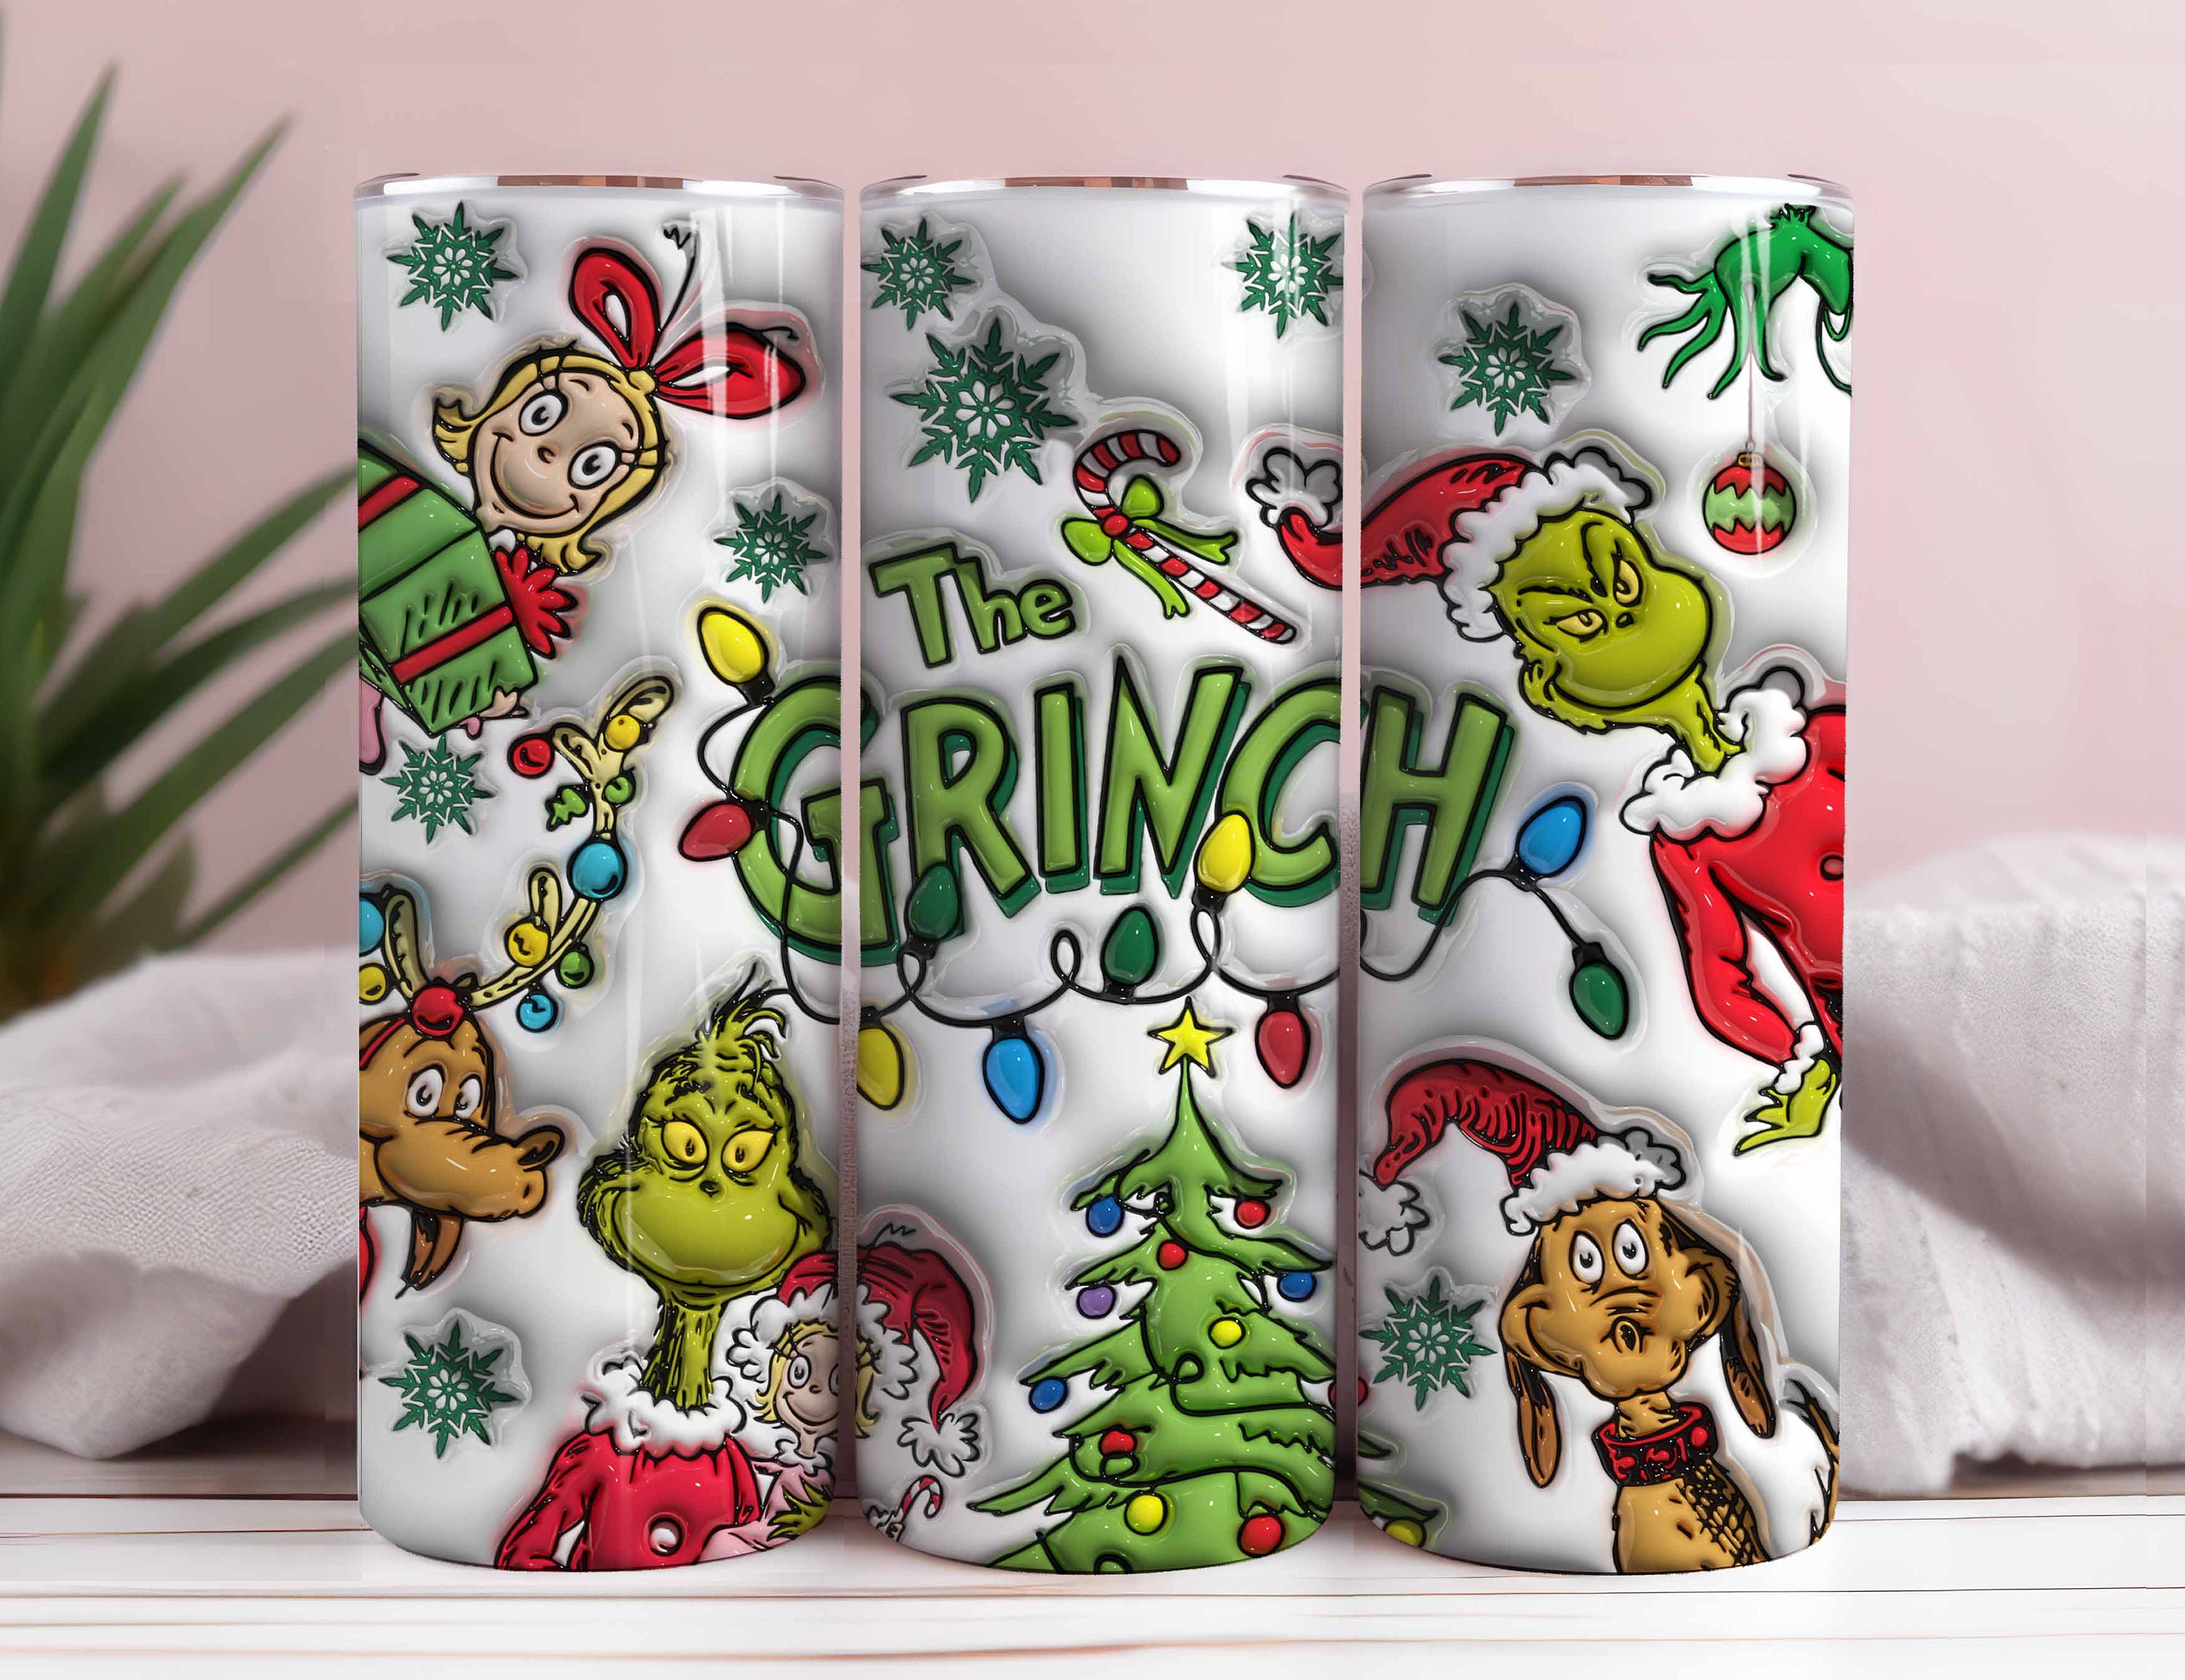 Christmas Character Grinch Quotes 40 oz 2 piece Tumbler Wrap 